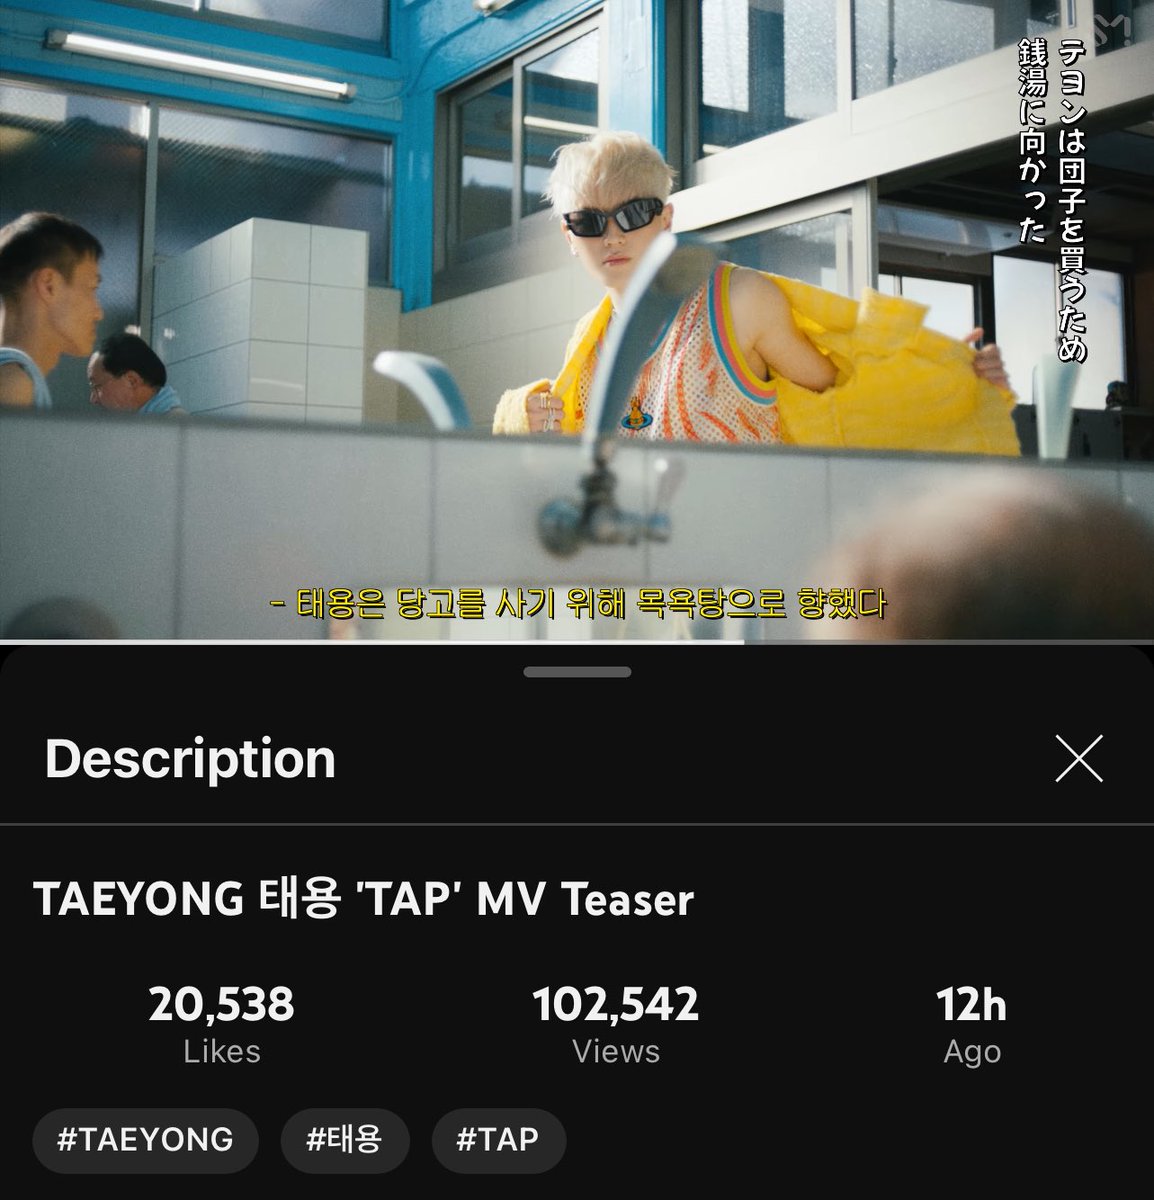 PLEASE KEEP STREAMING ON YOUTUBE

Goal🎯
Views : 200k🔥
Likes : 25k
Comments : 2k (current 1.4k) 

TAEYONG 태용 'TAP' MV Teaser
➫ youtu.be/ntb0BBhDUgU?si… 

💿Pre-order
TAEYONG.lnk.to/TAP

D-2 UNTIL TAP
#TY_TAP_MVTeaser #TAEYONG_TAP
 #TAEYONG #태용